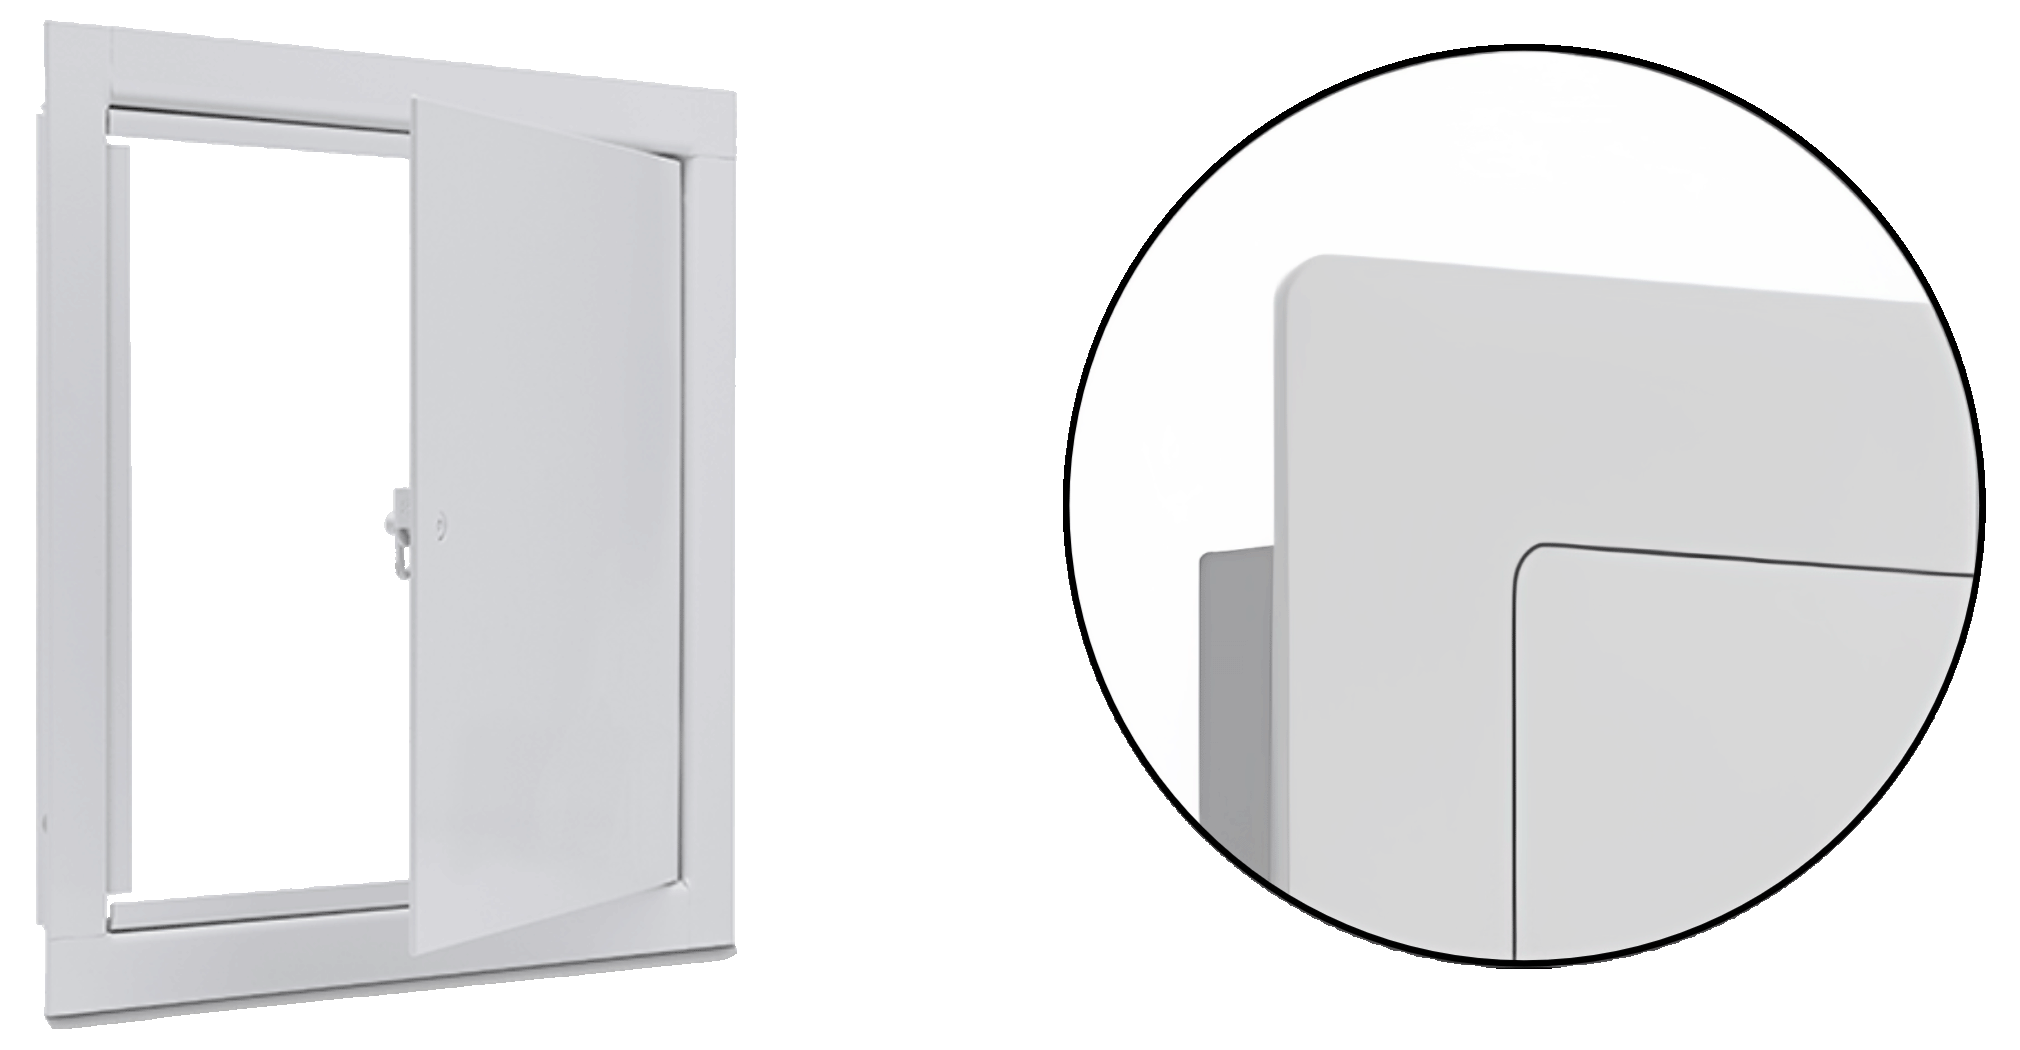 KEES risk-resistant access panels